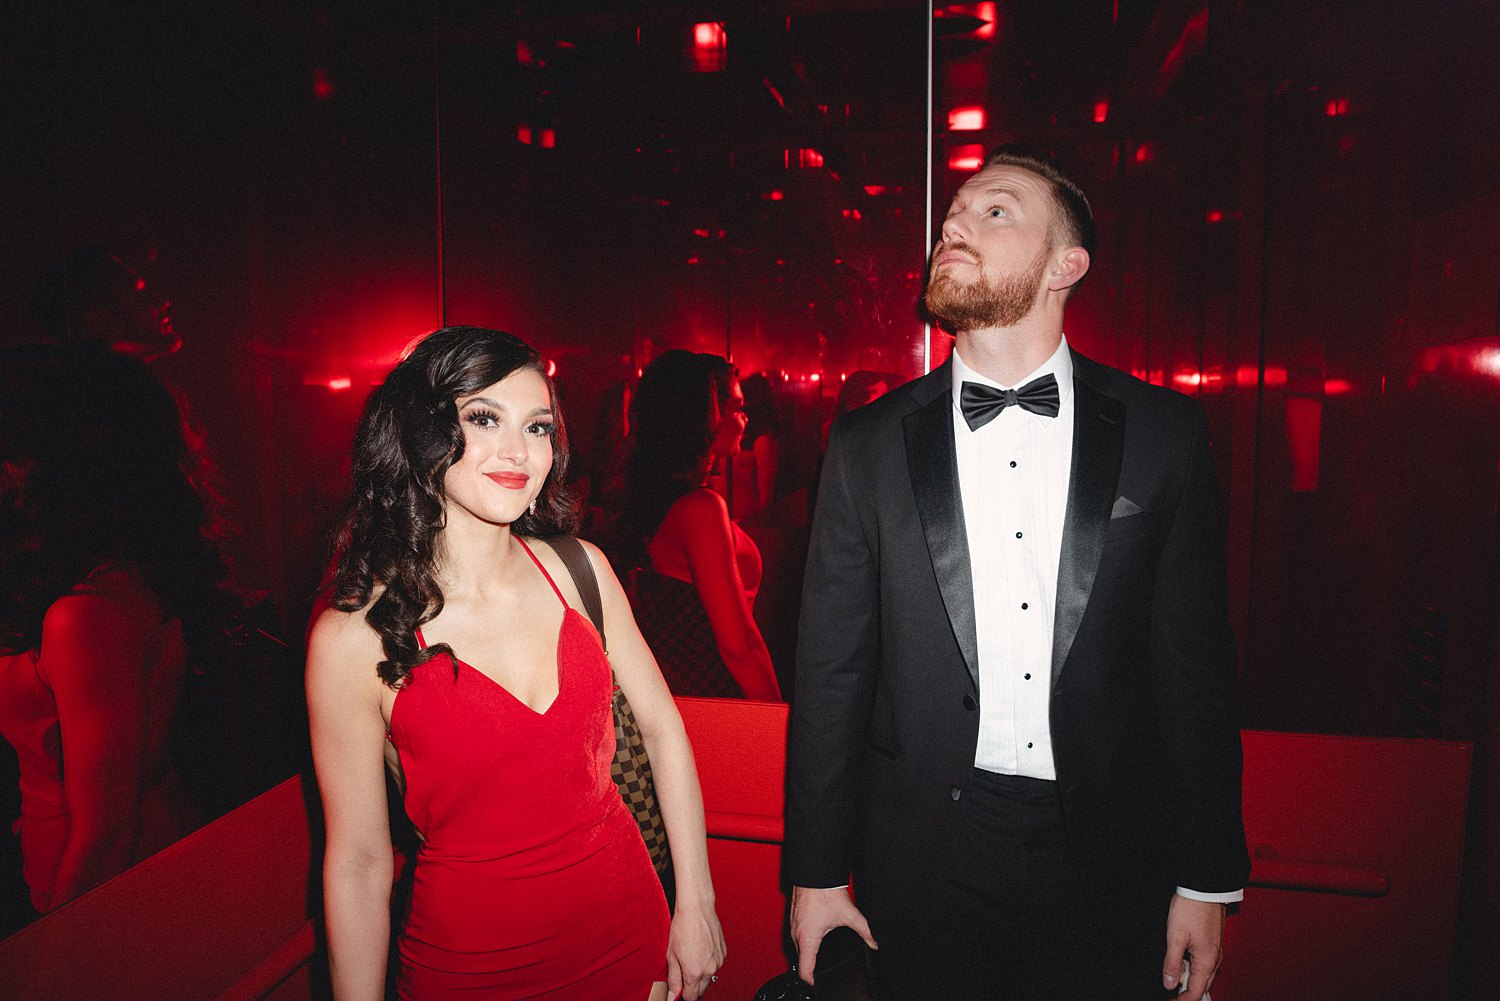 Woman in Red Dress and man in black tuxedo standing together in Virgin Hotel elevator